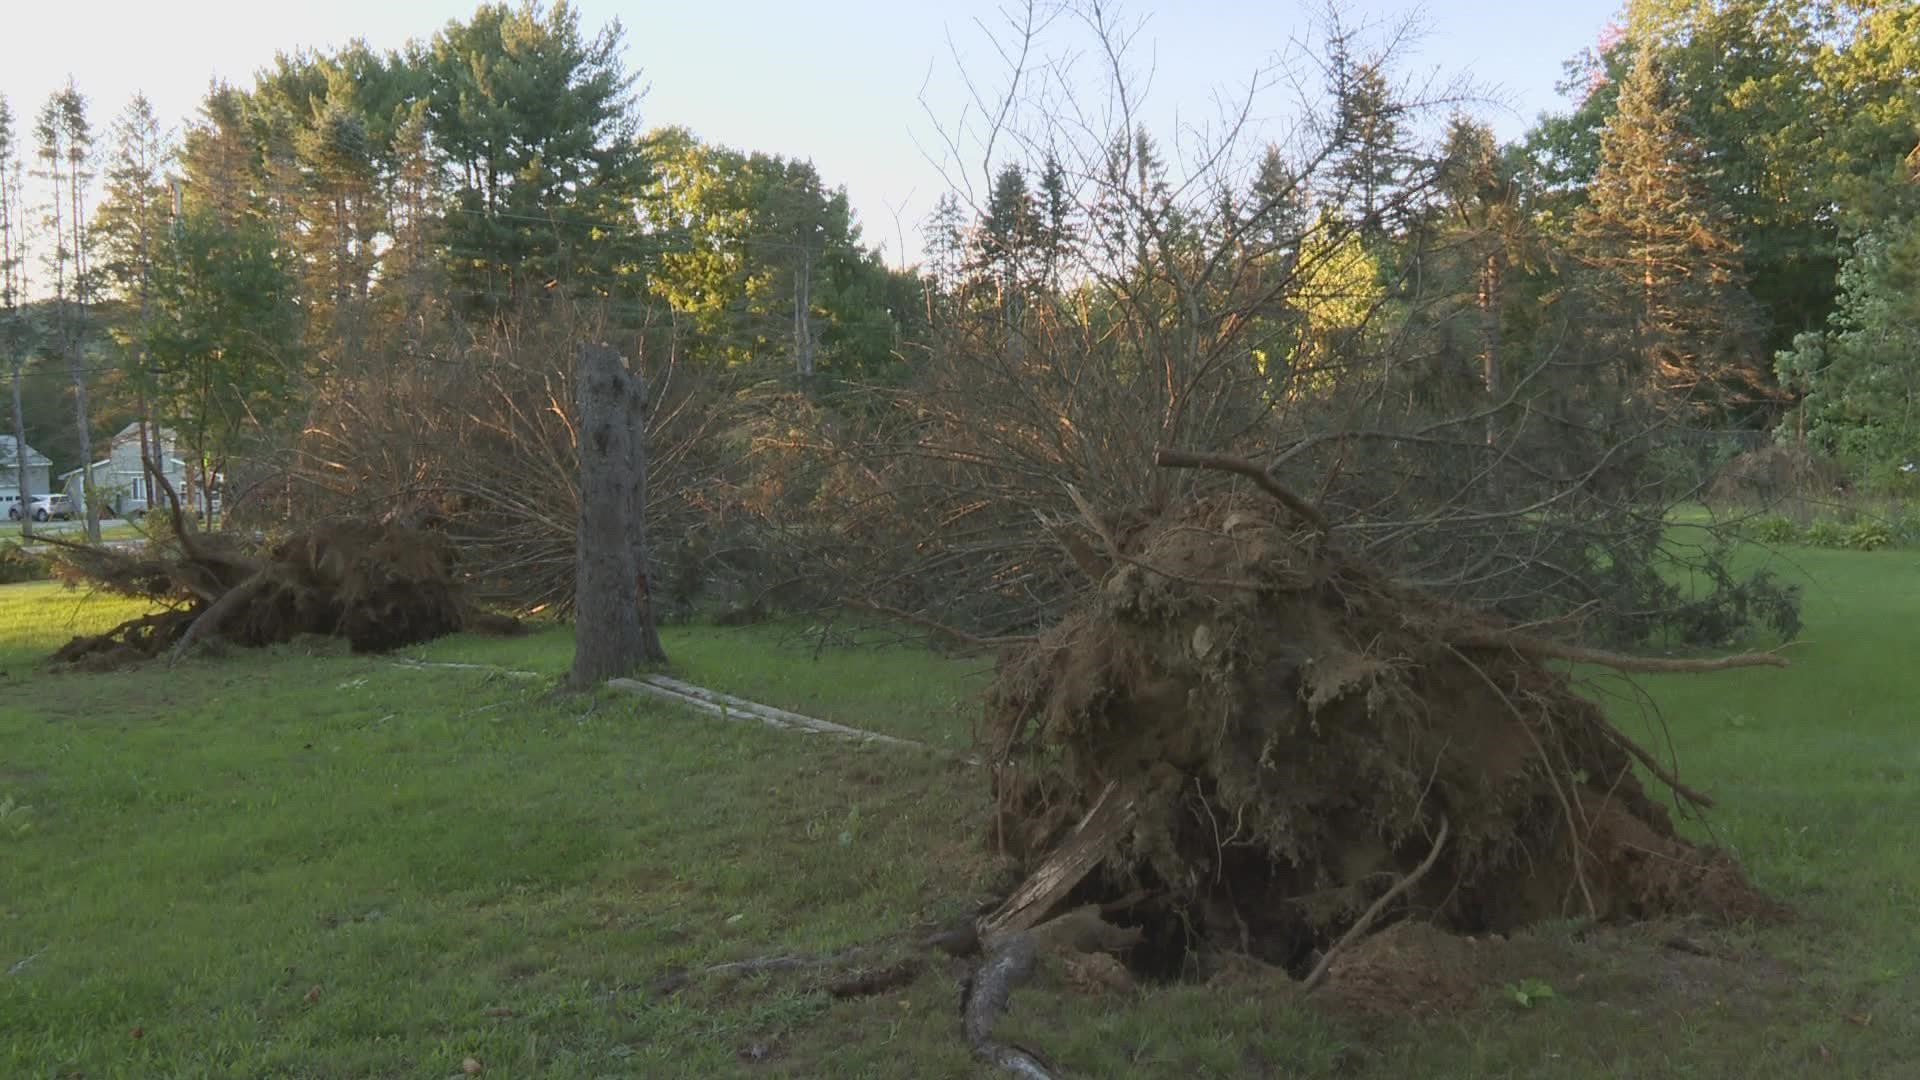 The storm blew through quickly, with strong winds downing trees. However, emergency officials say the damage could have been much worse.